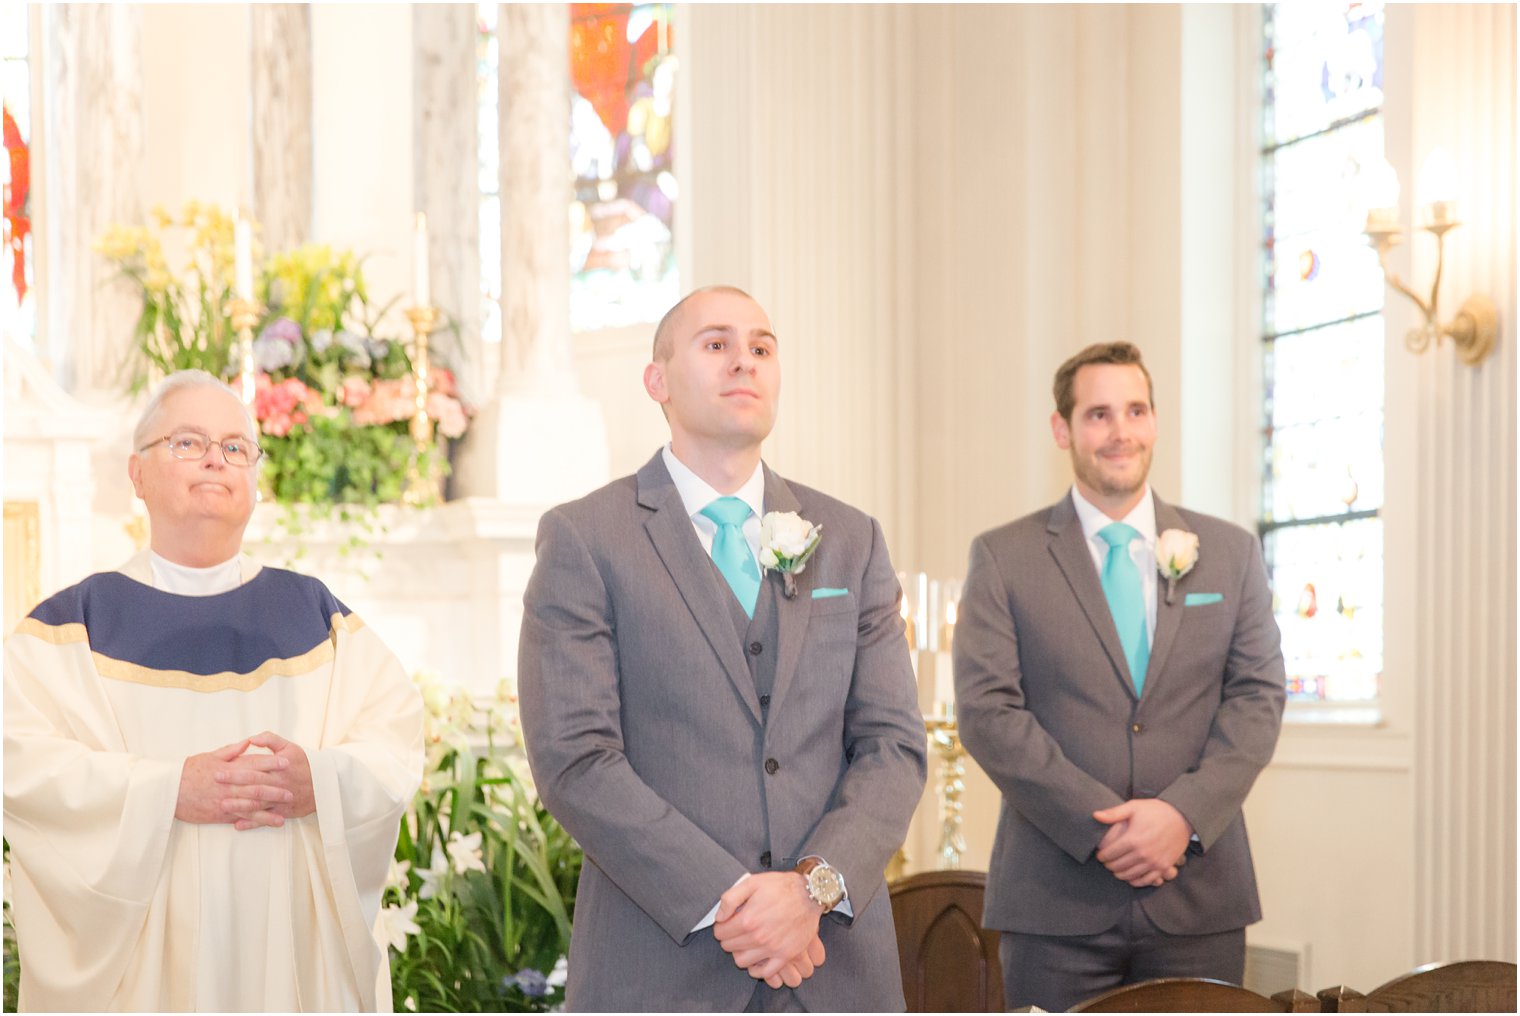 Groom seeing his bride for the first time at St. Catharine's Church in Spring Lake